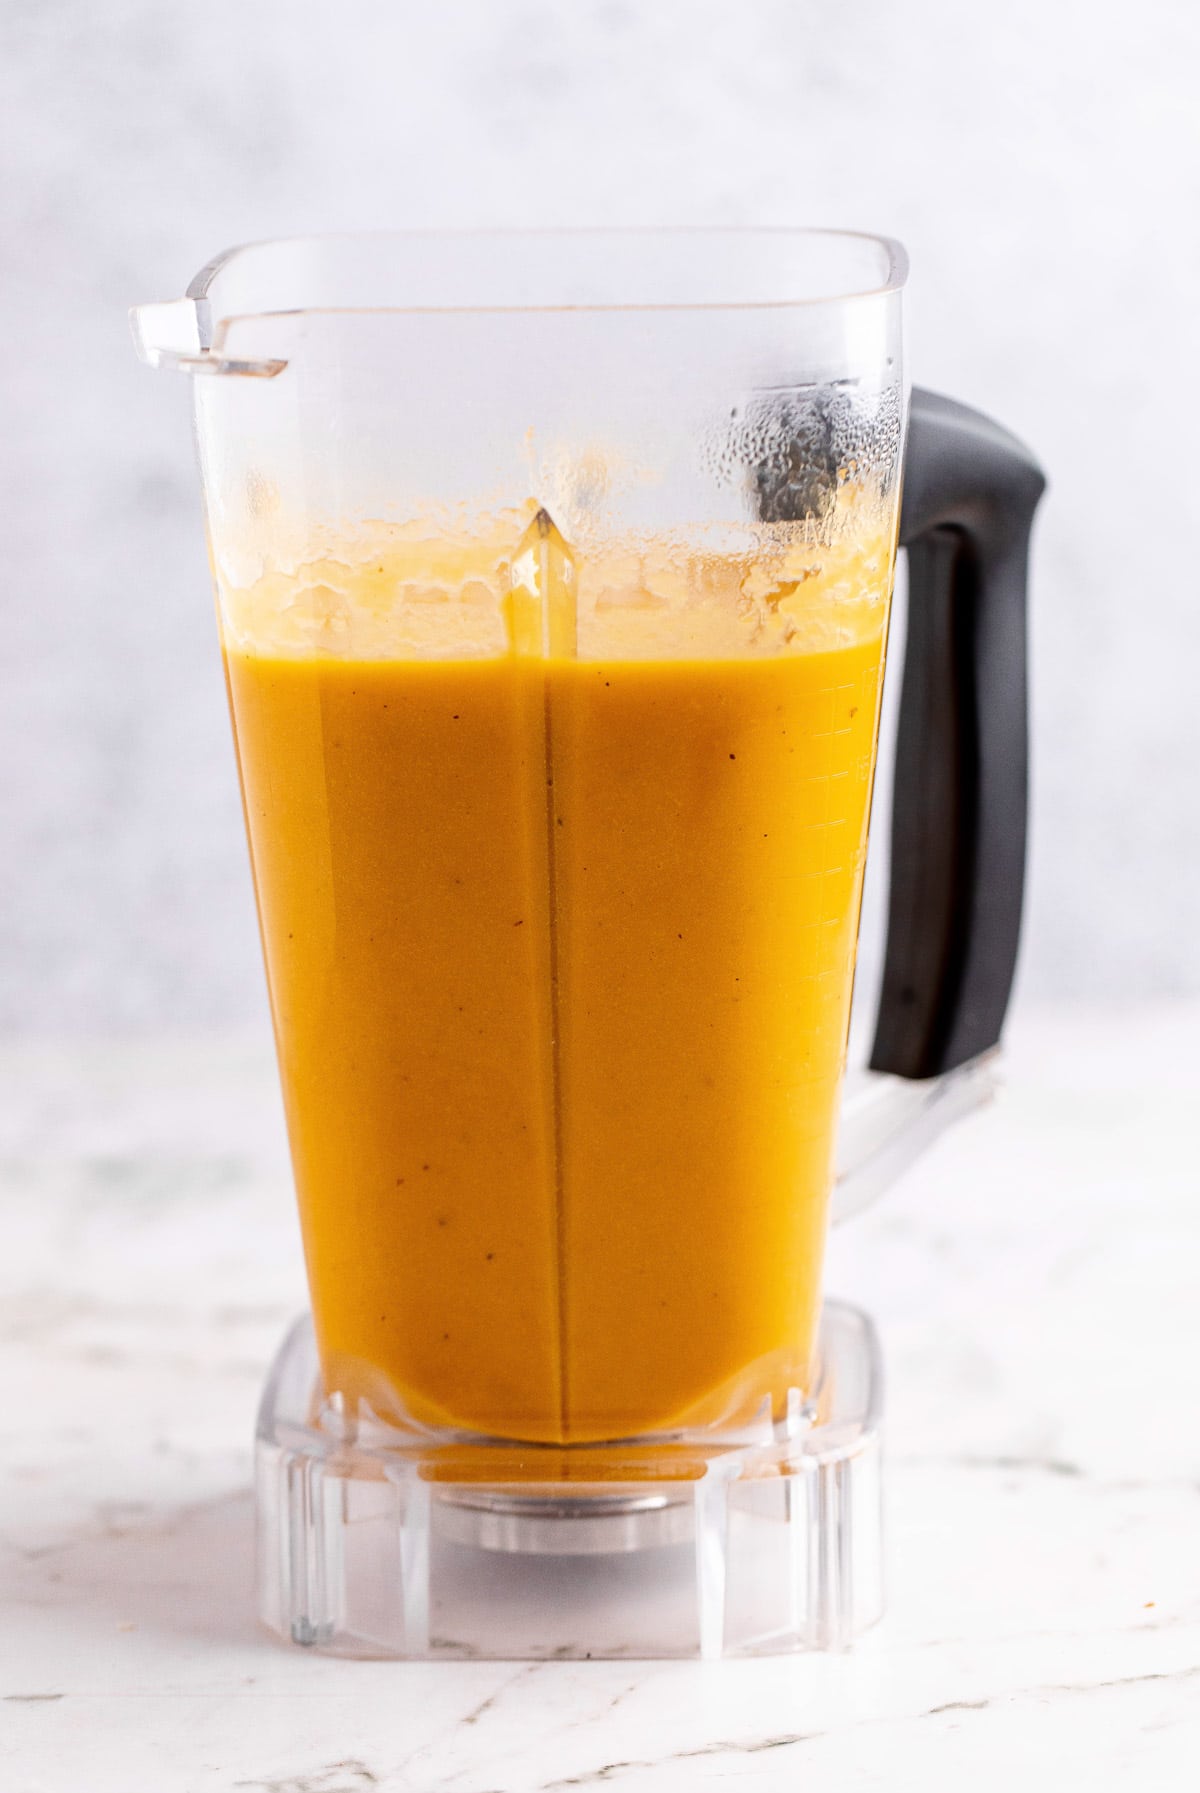 Pureed carrot soup in a blender canister.